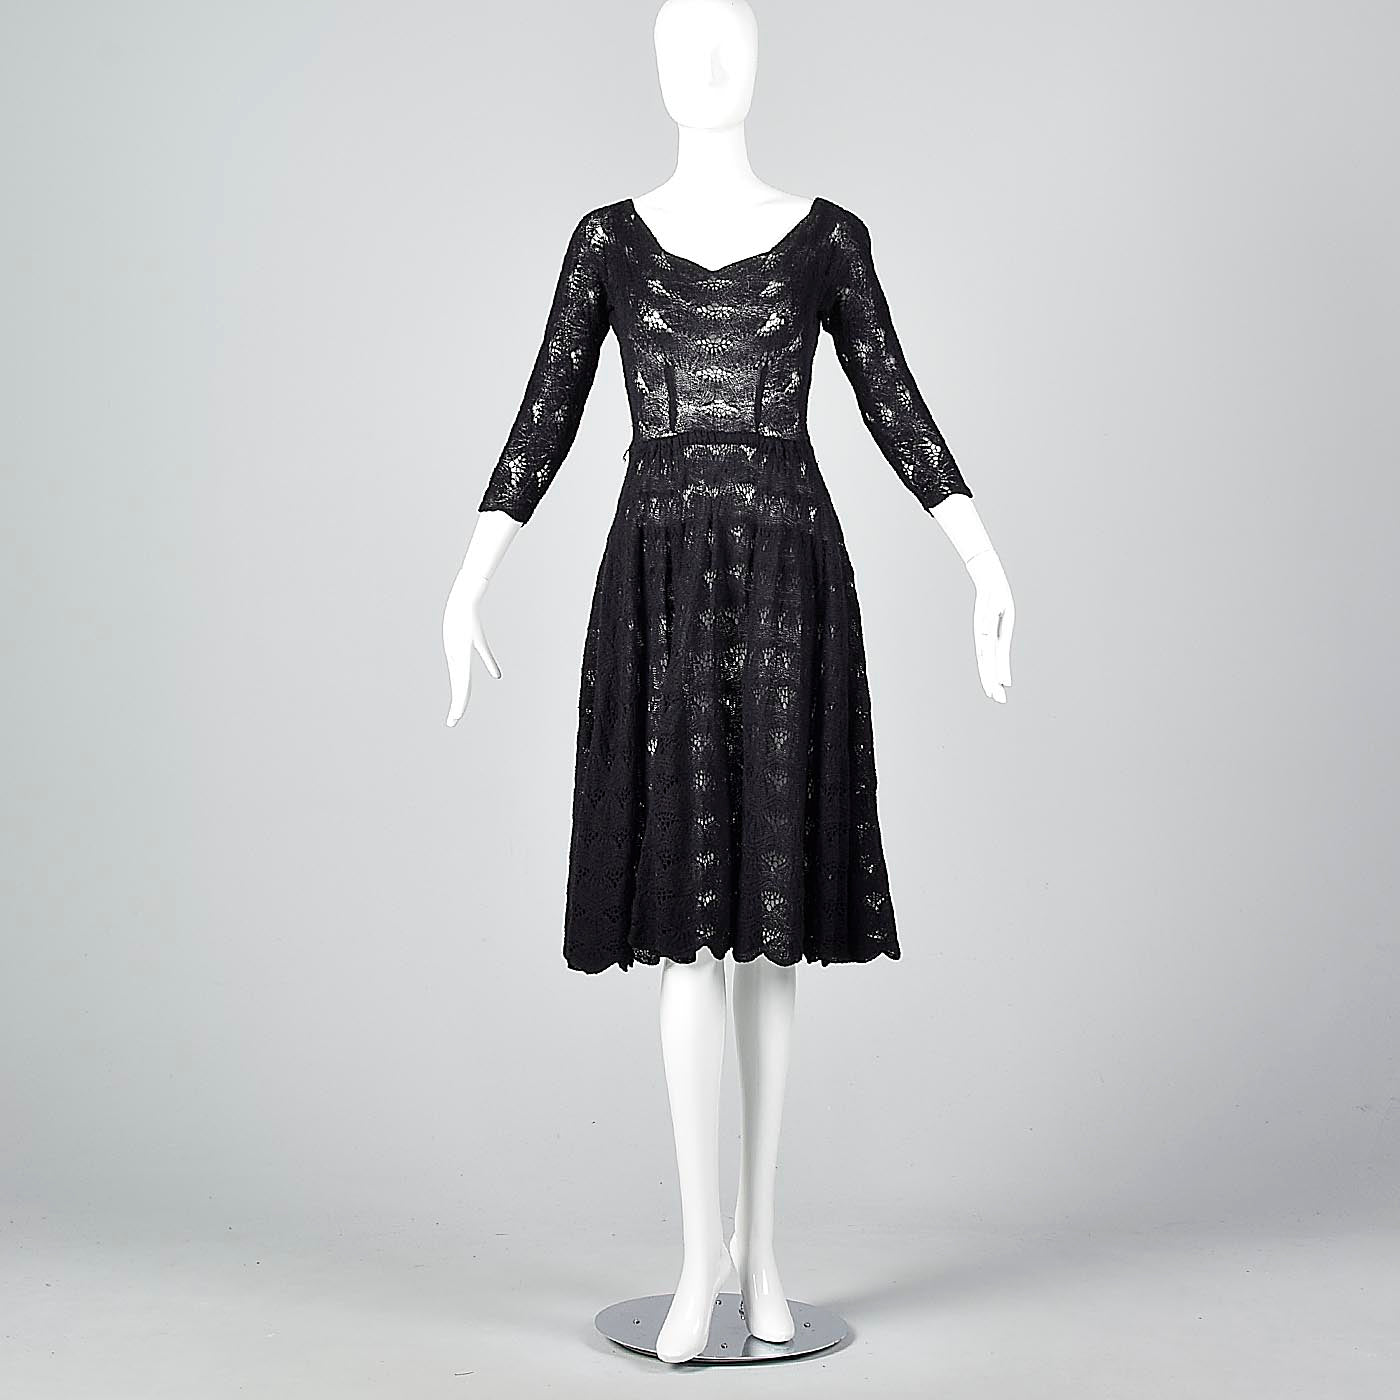 1950s Sexy Black Crochet Cocktail Dress with Full Skirt